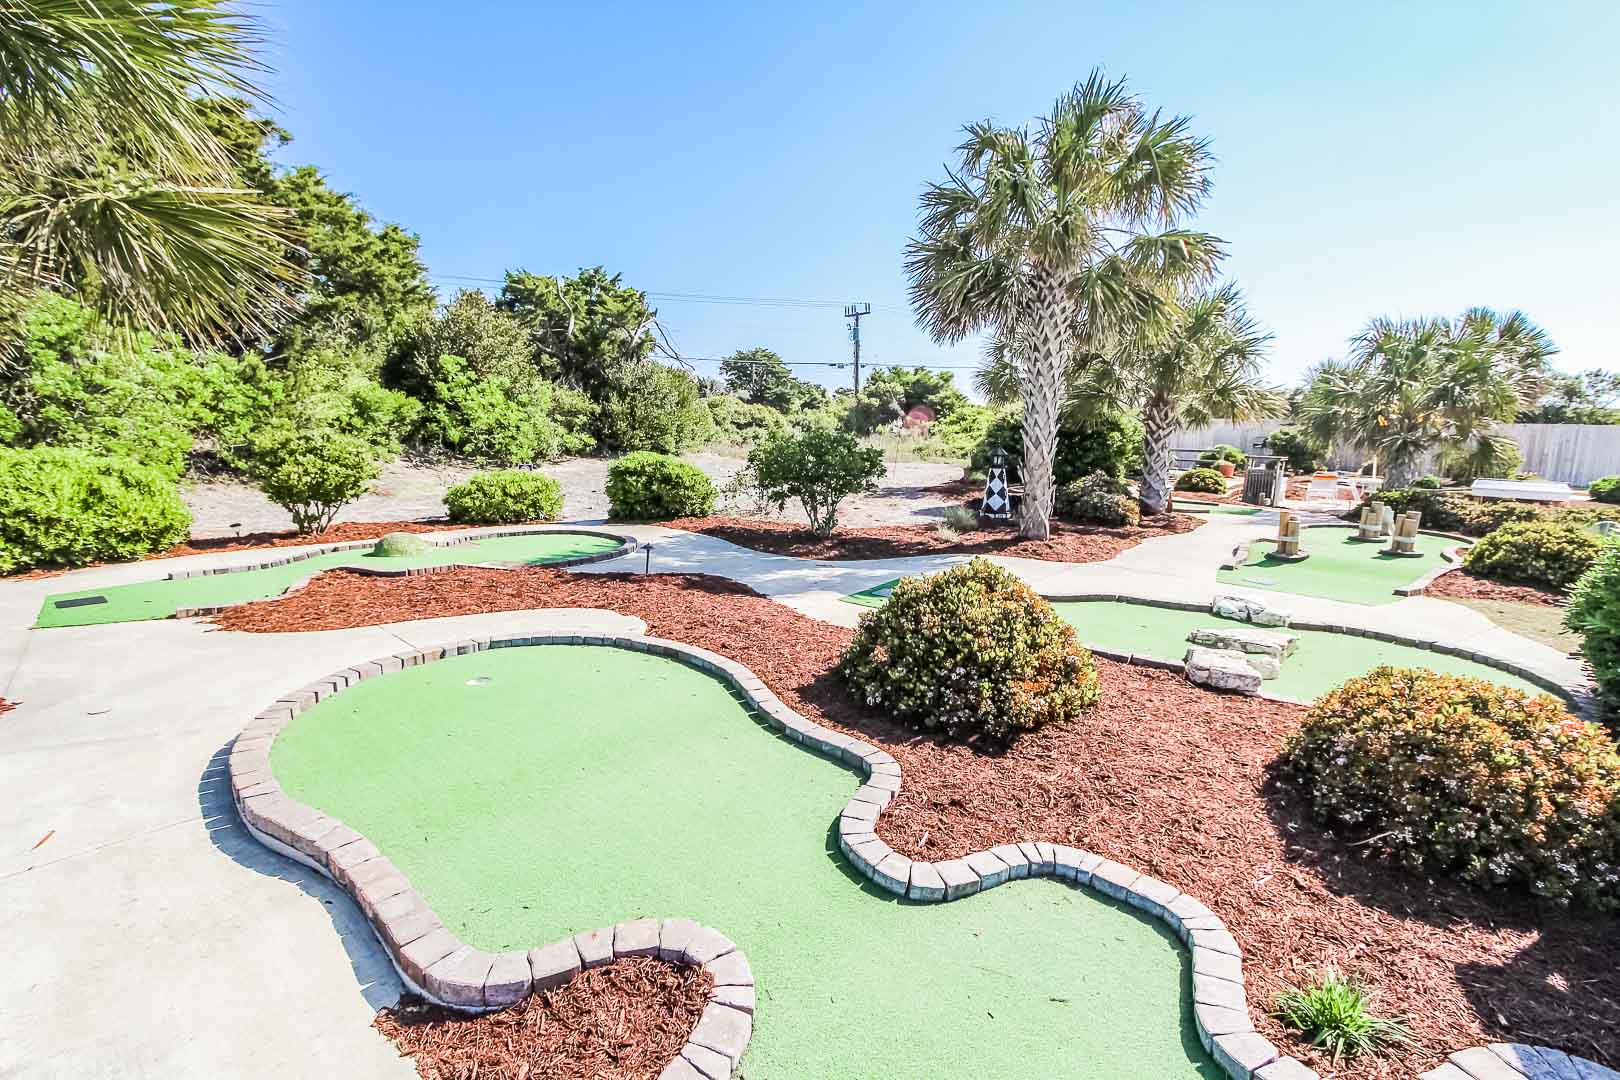 A mini-golf area for the family to enjoy at VRI's A Place at the Beach III in North Carolina